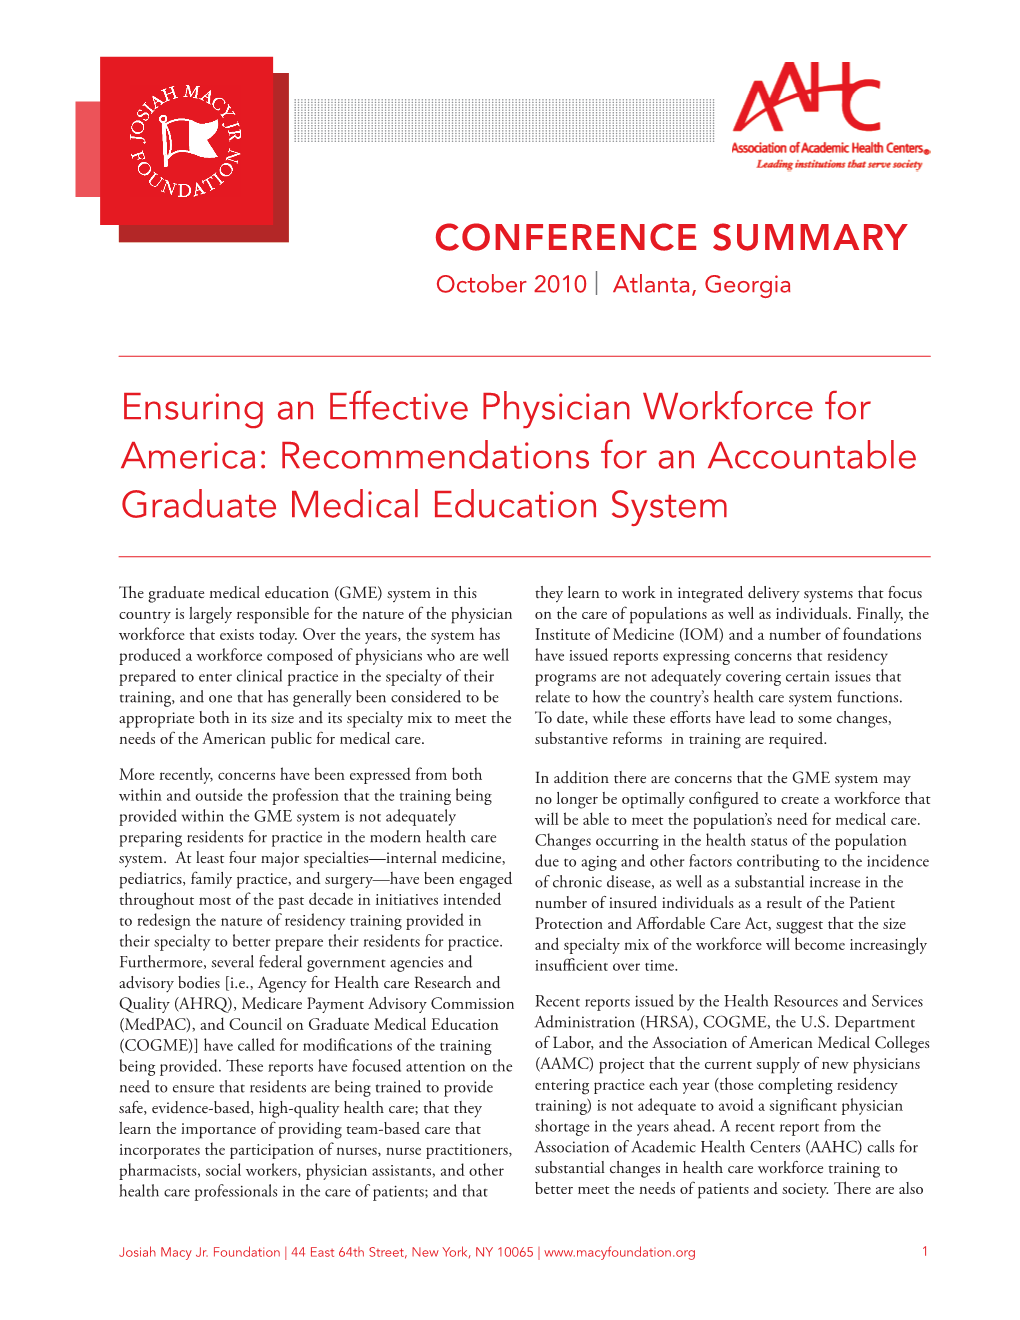 Ensuring an Effective Physician Workforce for America: Recommendations for an Accountable Graduate Medical Education System